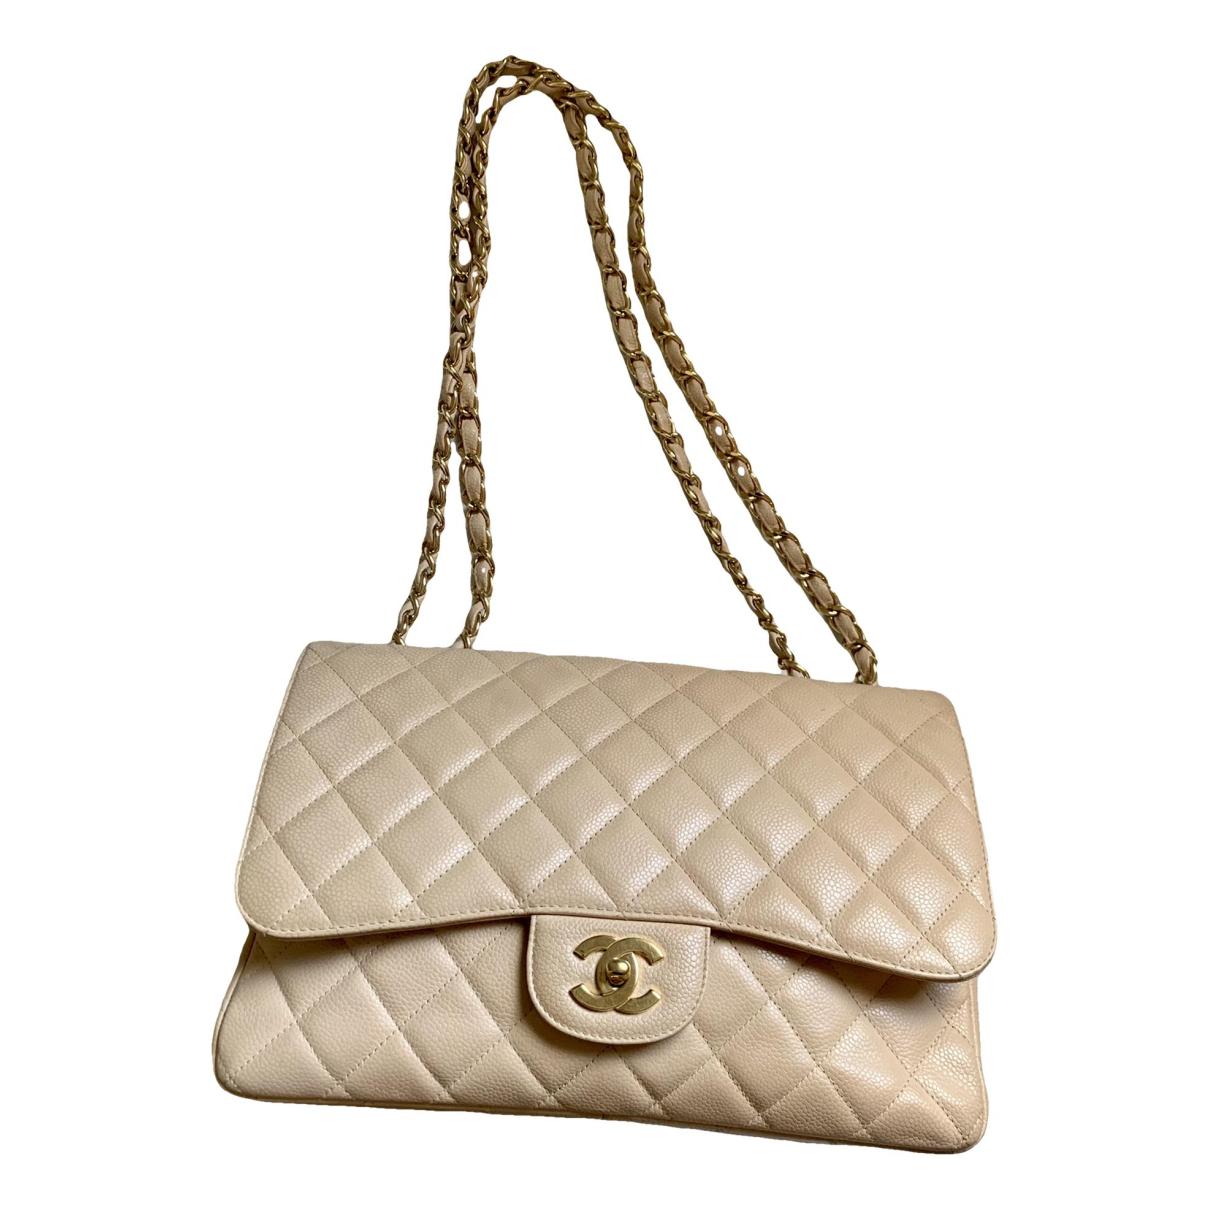 Timeless/classique leather crossbody bag Chanel Beige in Leather - 32239129